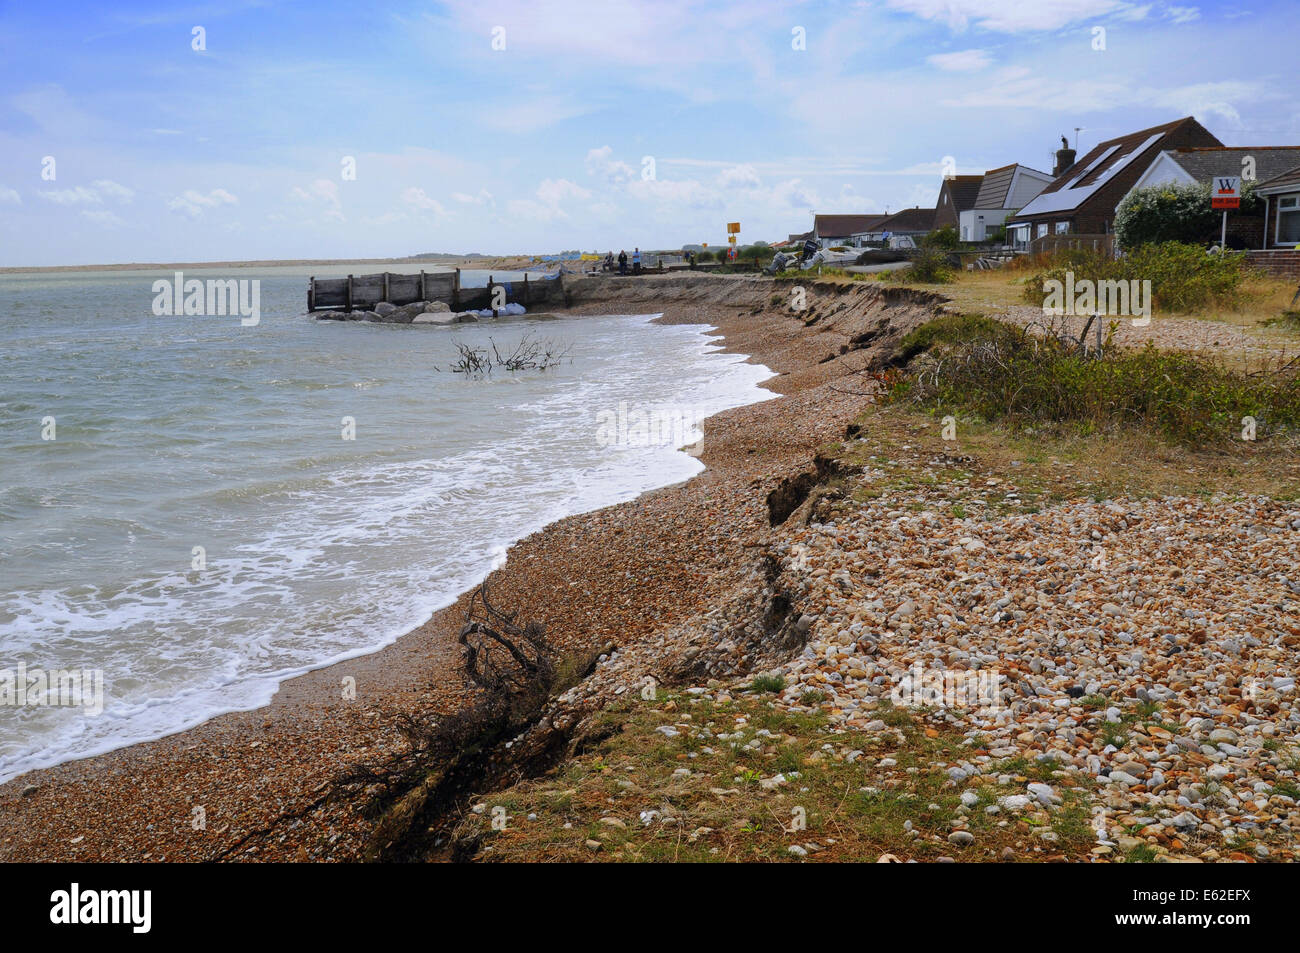 Pagham, West Sussex, UK.12 August 2014.Coastal erosion continues along the South Coast, accelerated by recent unseasonal storms. Bungalows on the beach at Pagham are now close to the advancing sea. Efforts are being made by Adur District Council to protect the properties, lorries evident today tipping large rocks on the shingle. Some locals are saying it is too little too late and believe that unless the large spit build up is breached again, as it was in the past, further erosion is inevitable. Credit:  David Burr/Alamy Live News Stock Photo